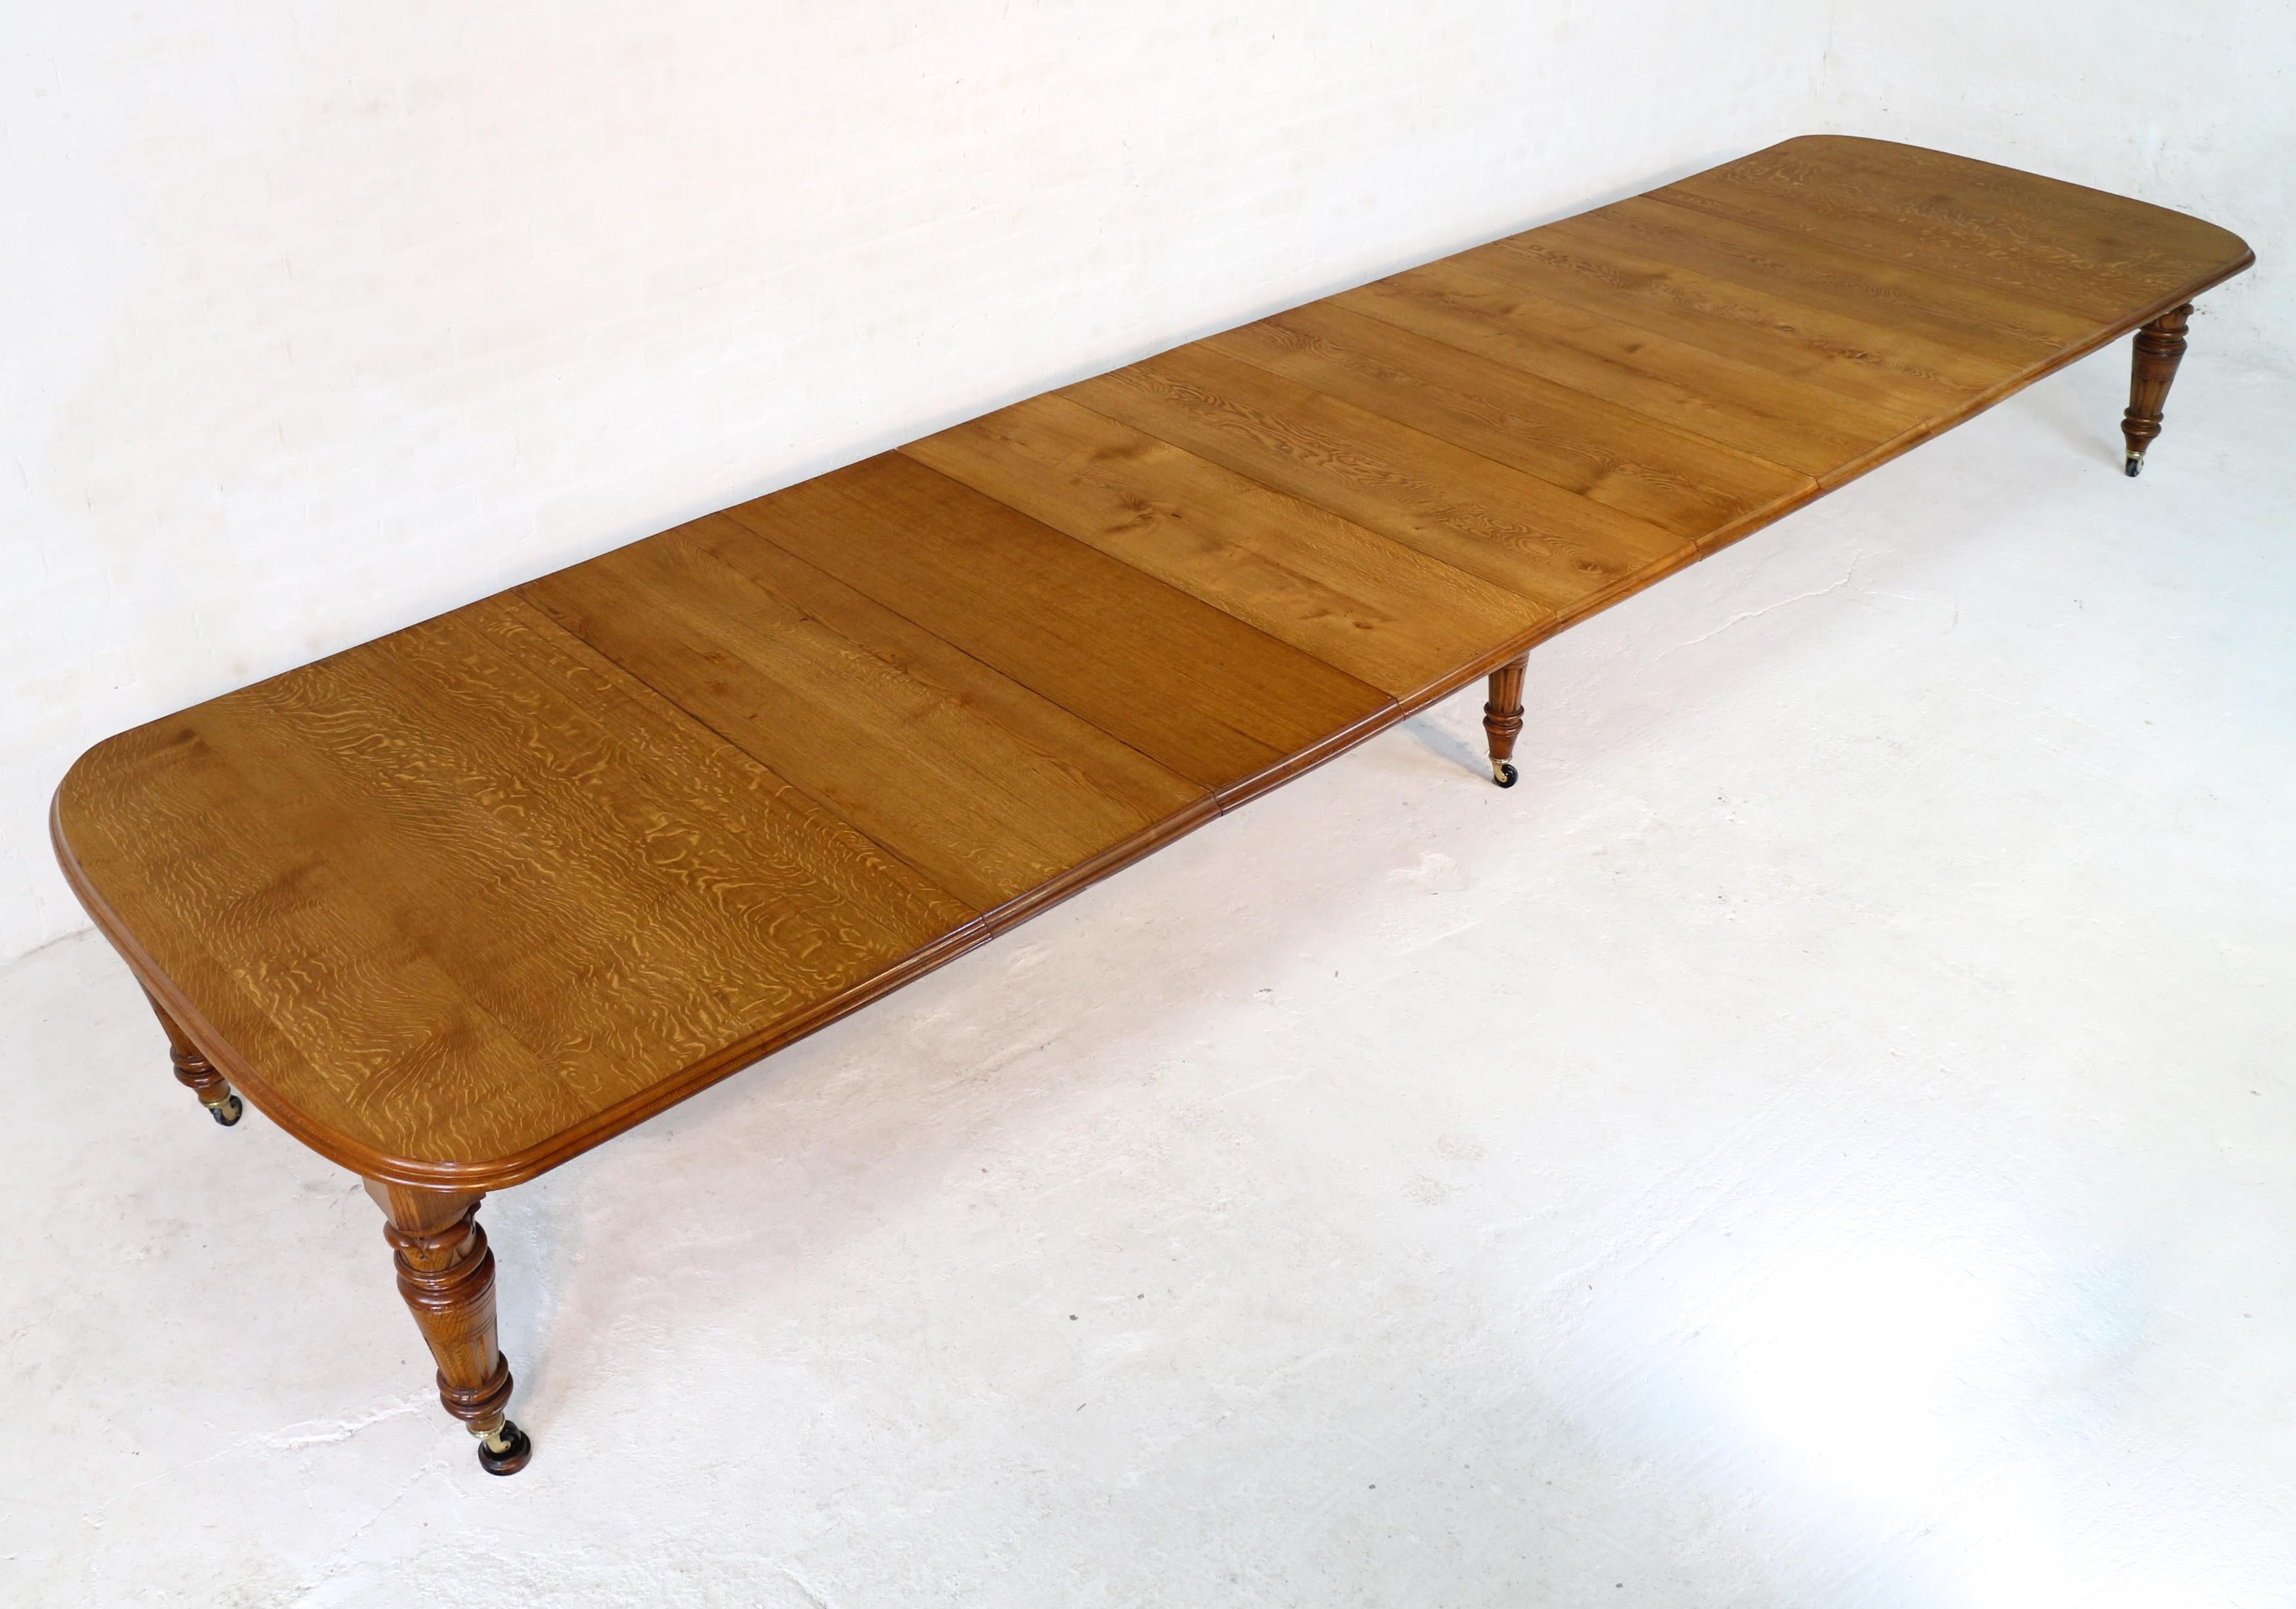 A large Victorian extending dining table in golden quarter-sawn oak and with eight leaves and winding handle. Dating to c.1860 this 56in wide table smoothly extends from 6ft 7in to 18ft 1in using a Joseph Fitter double screw winding mechanism